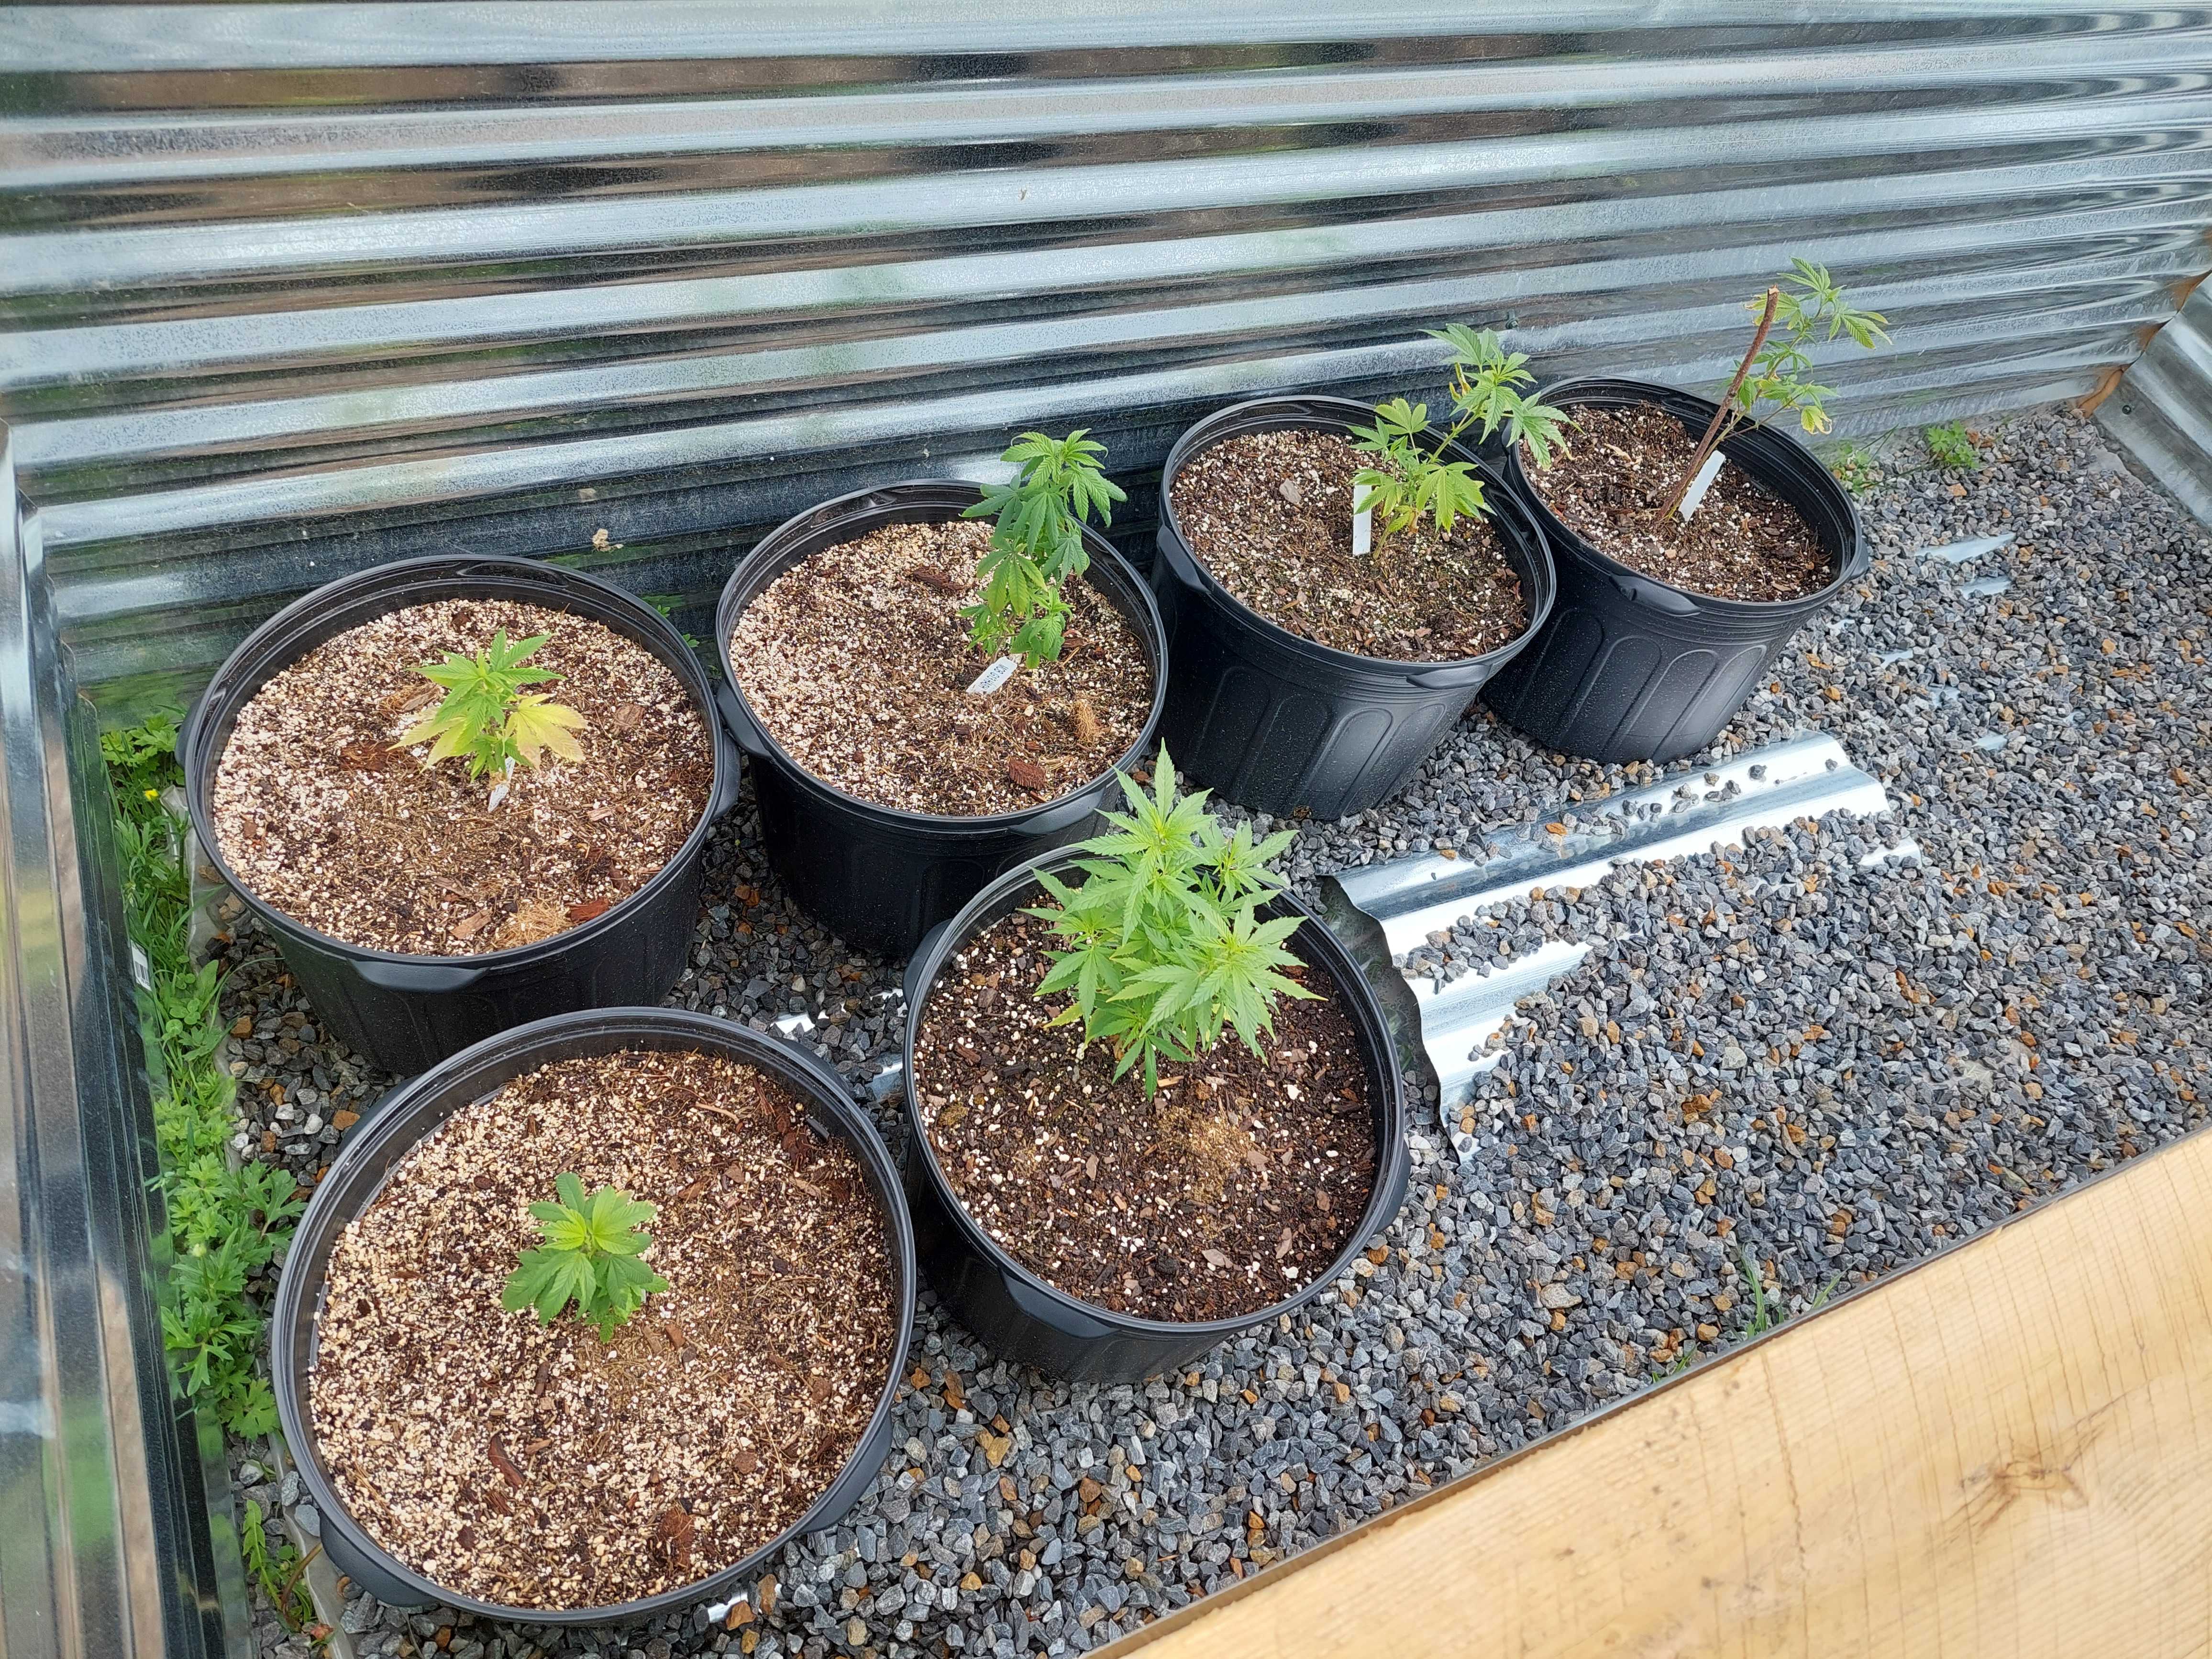 First transplant of my clones